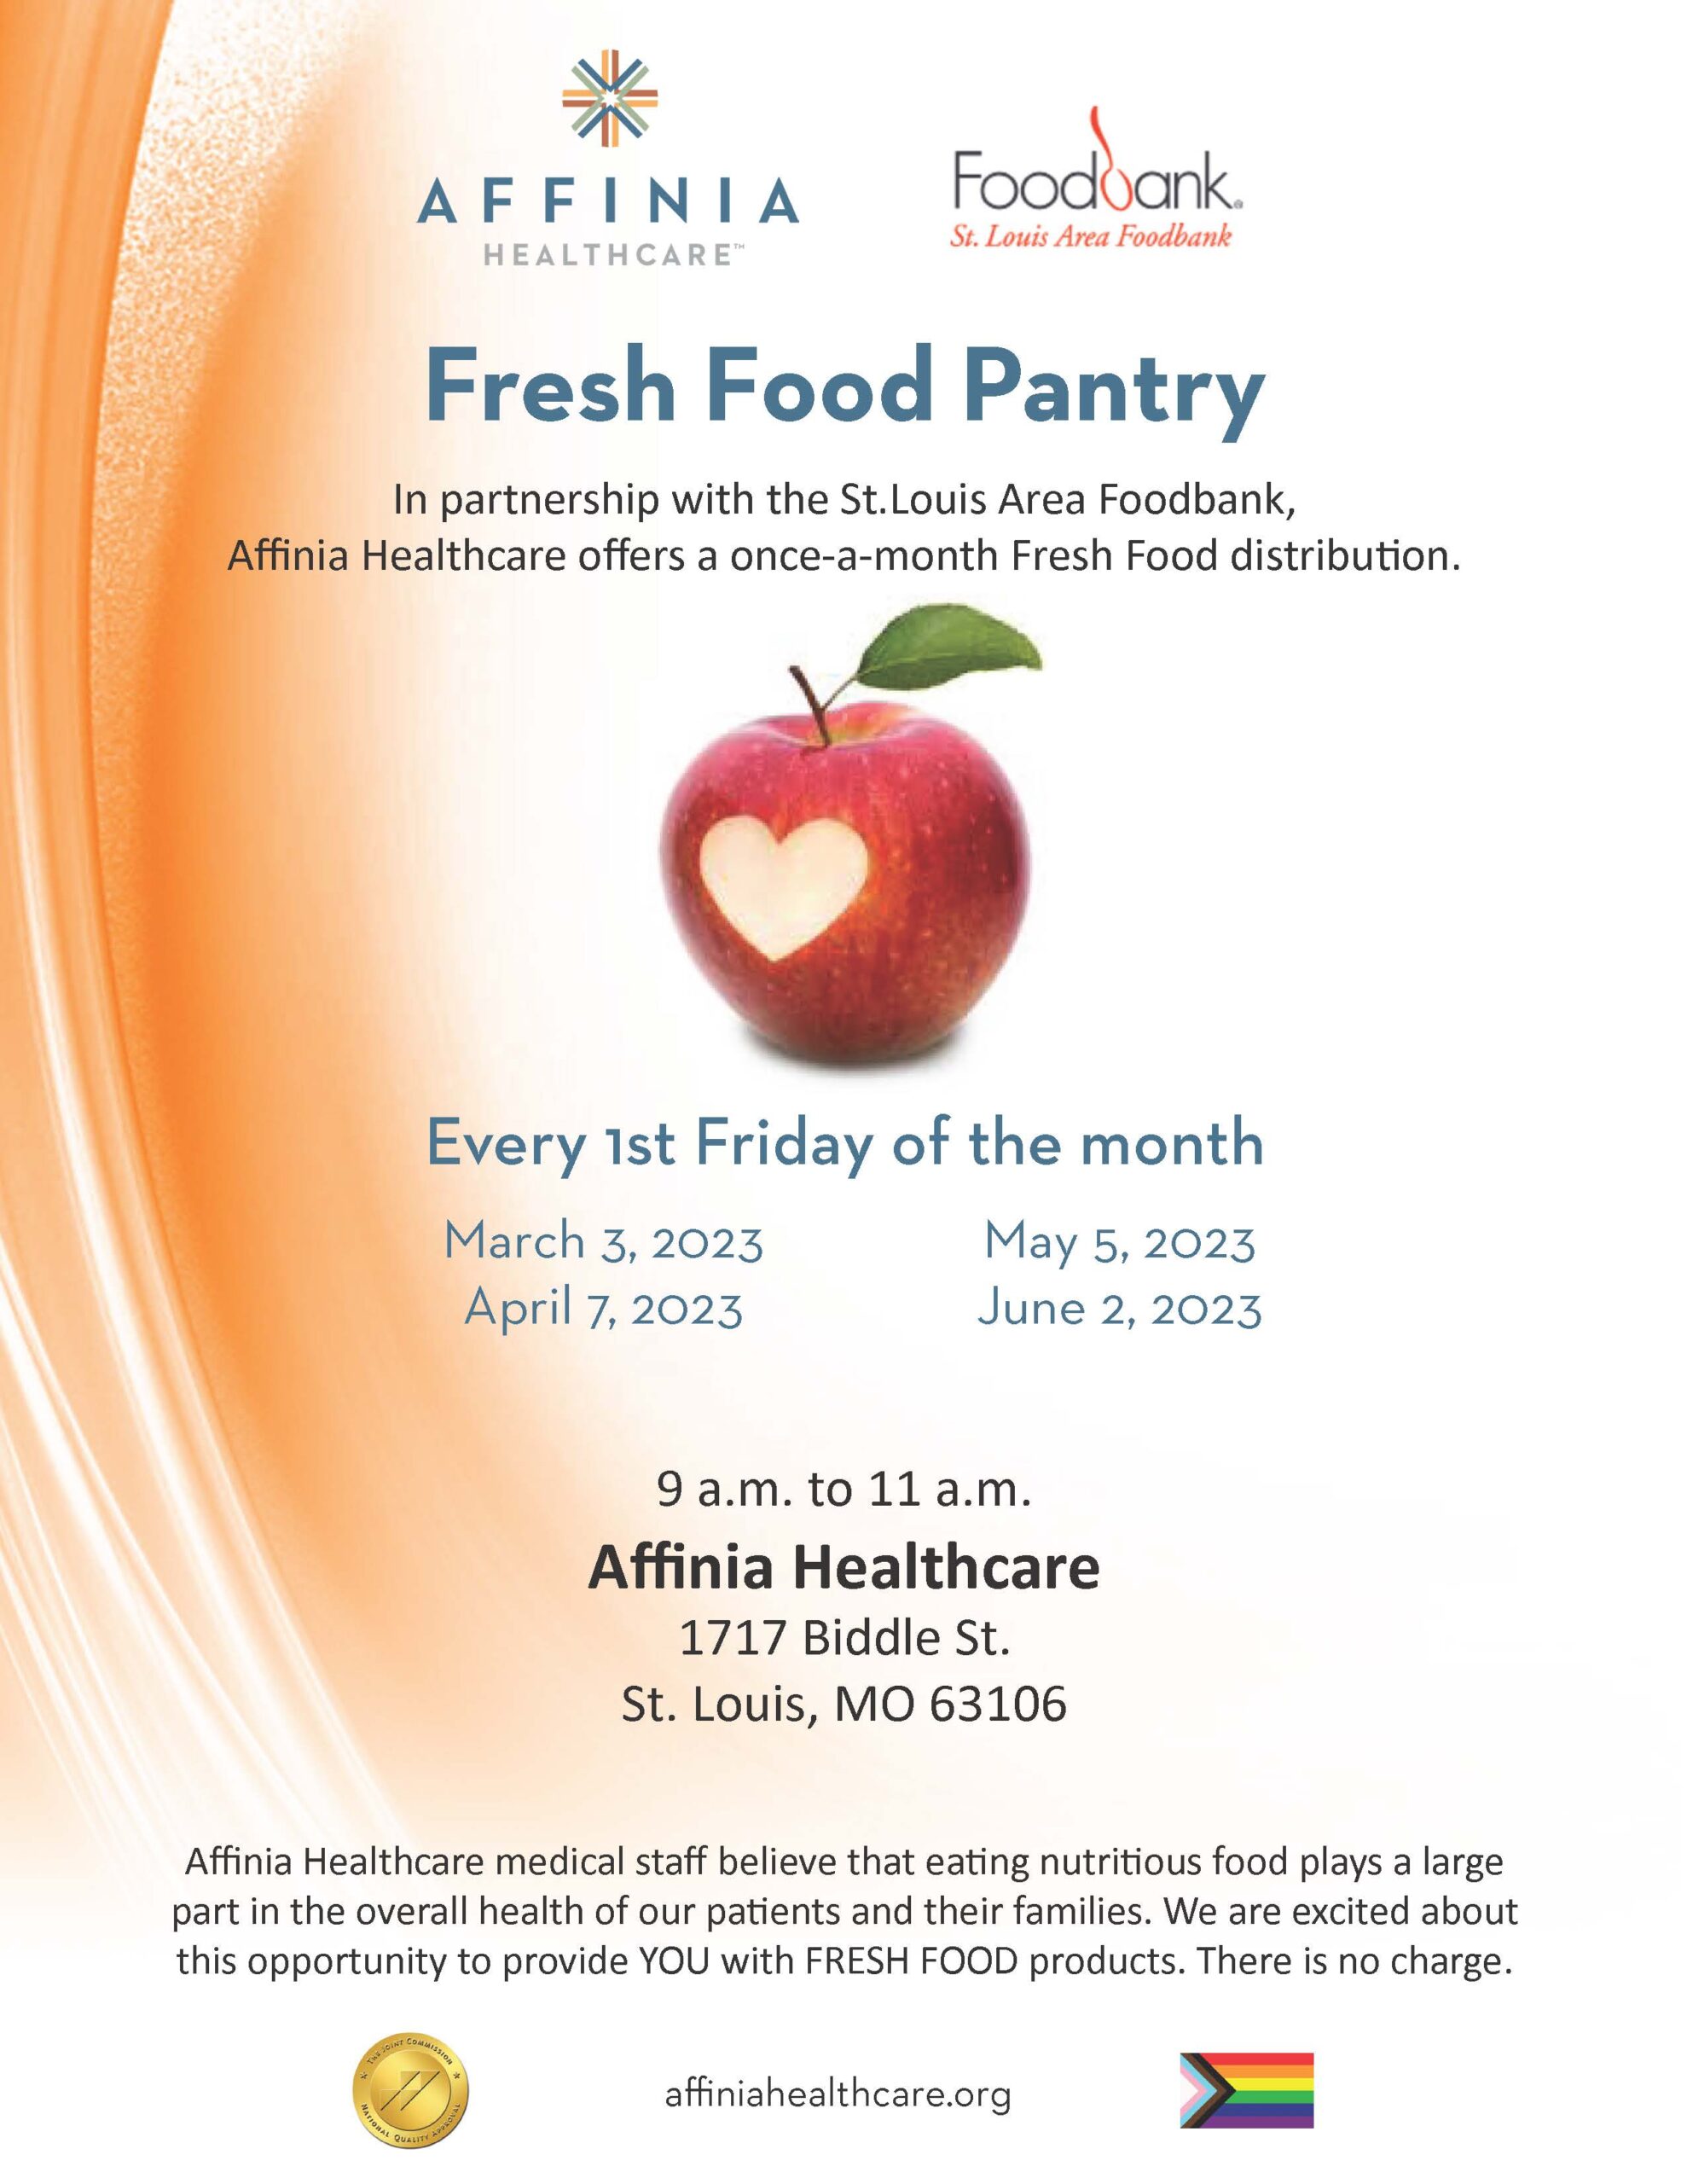 food pantry at biddle first friday of month